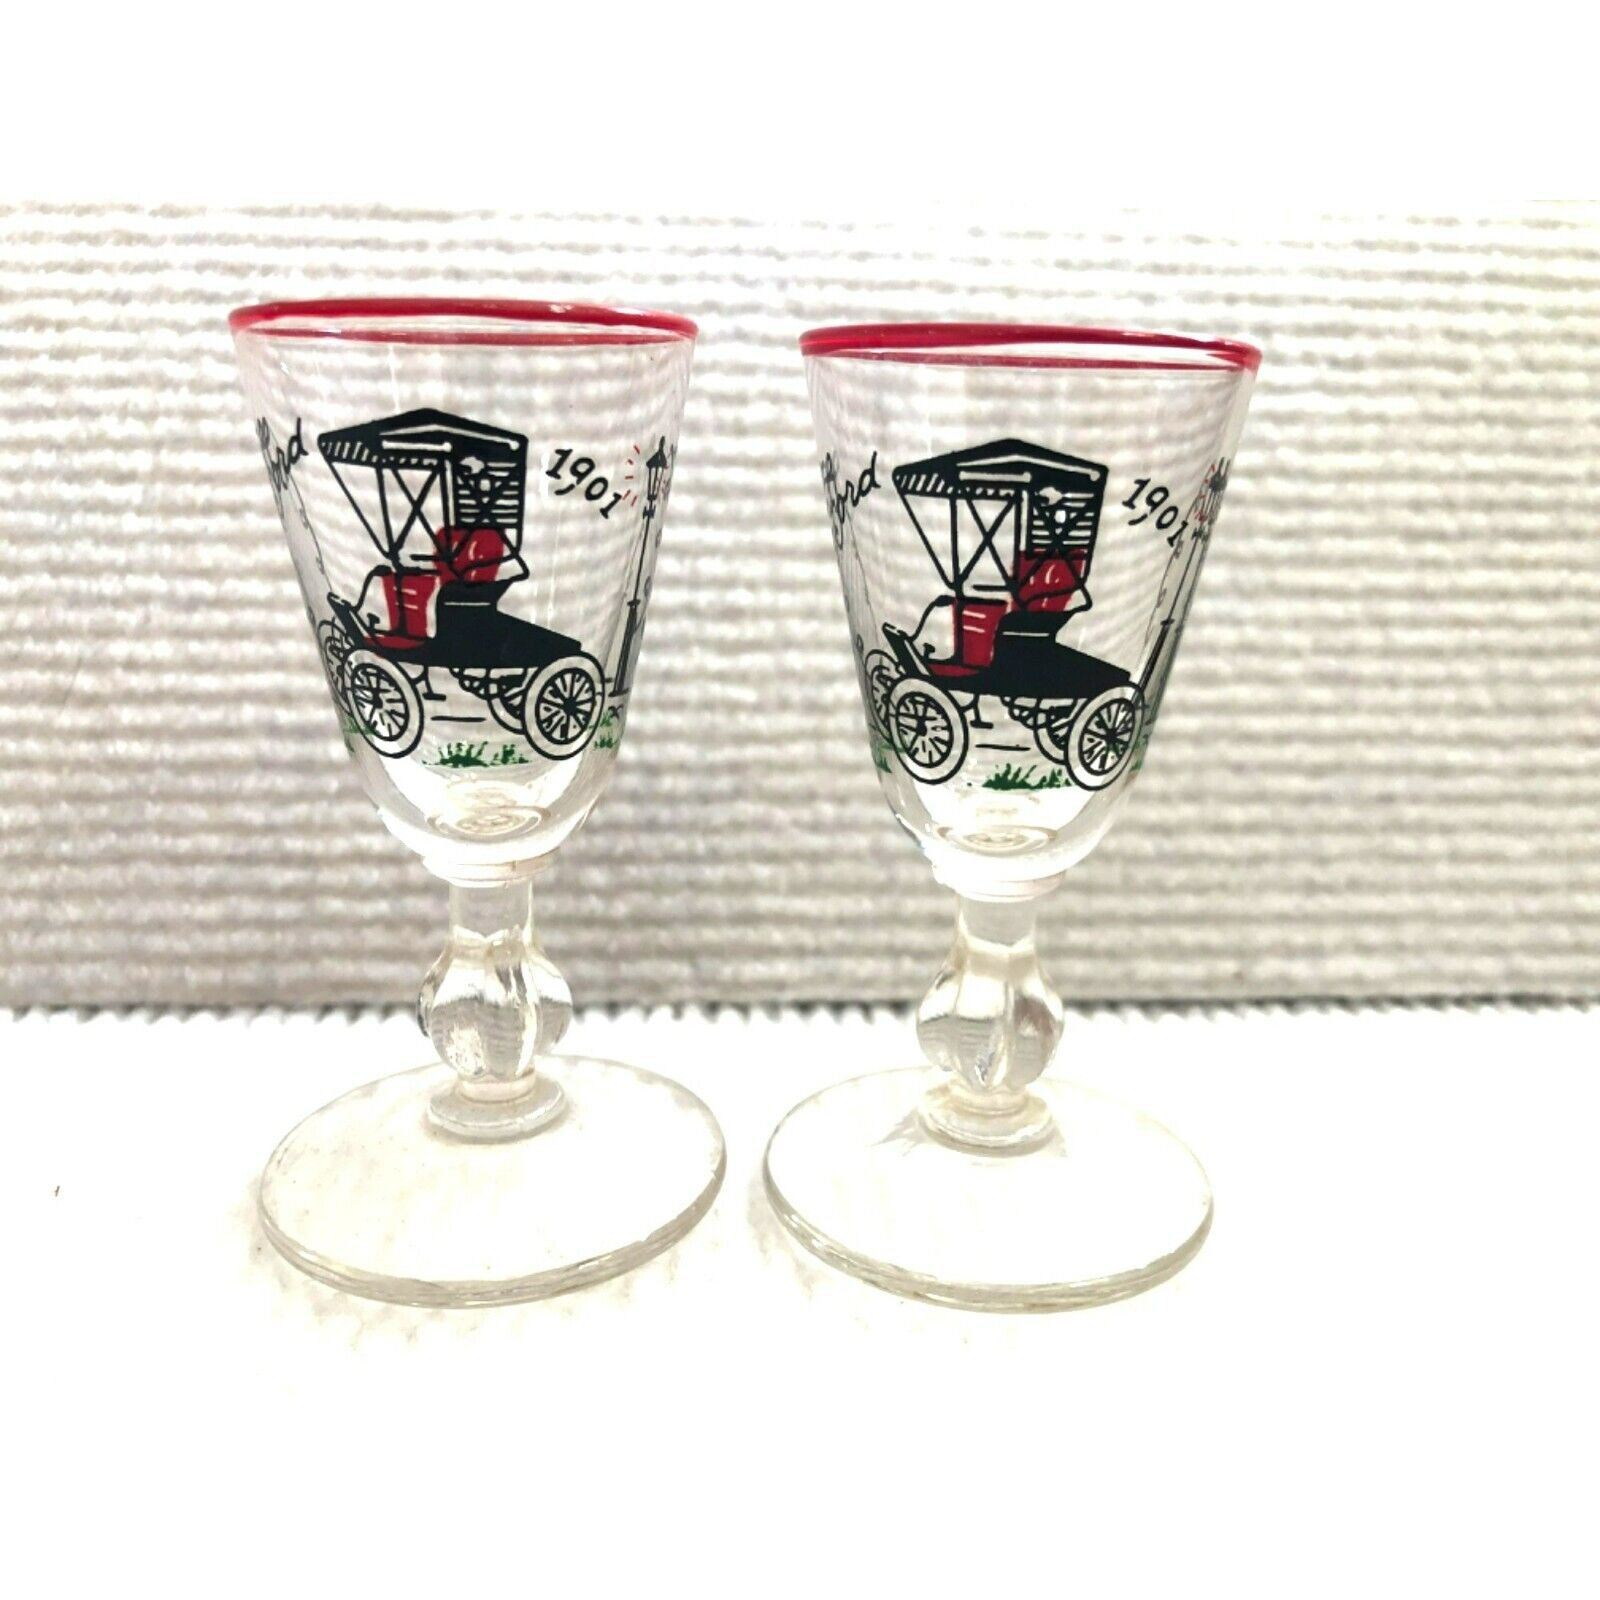 Libbey 50s Shooter Red Rimmed Bar Glasses Featuring 1901 Ford Set of 2